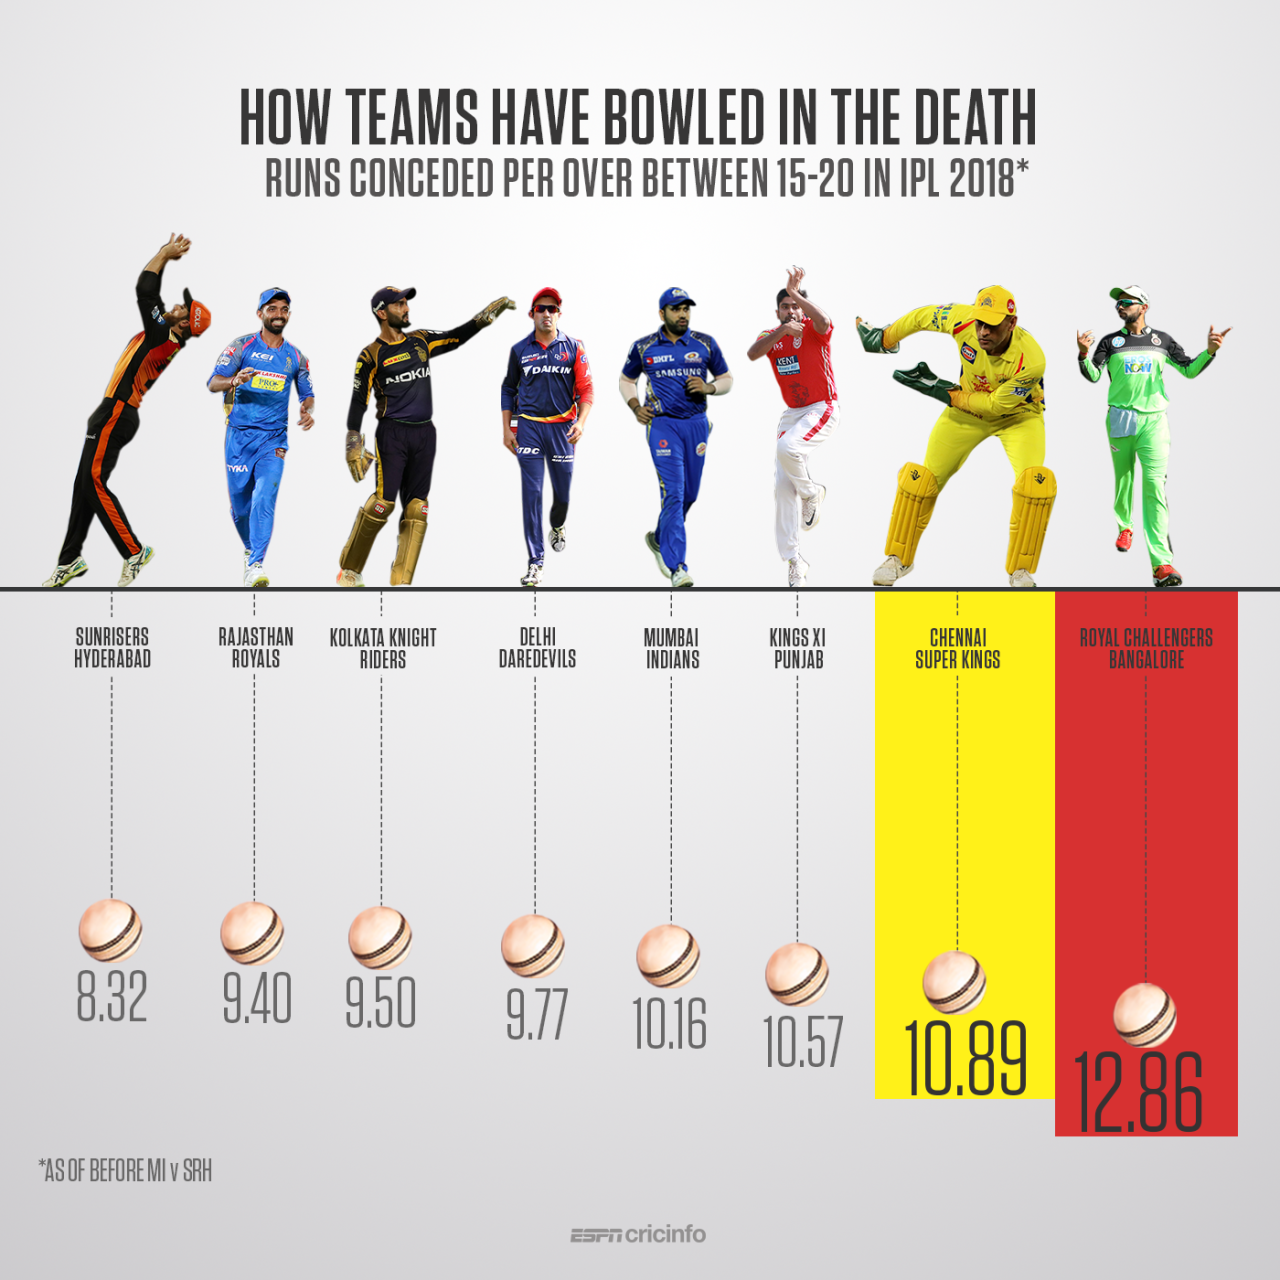 Royal Challengers Bangalore have been by far the most expensive bowling team in the death